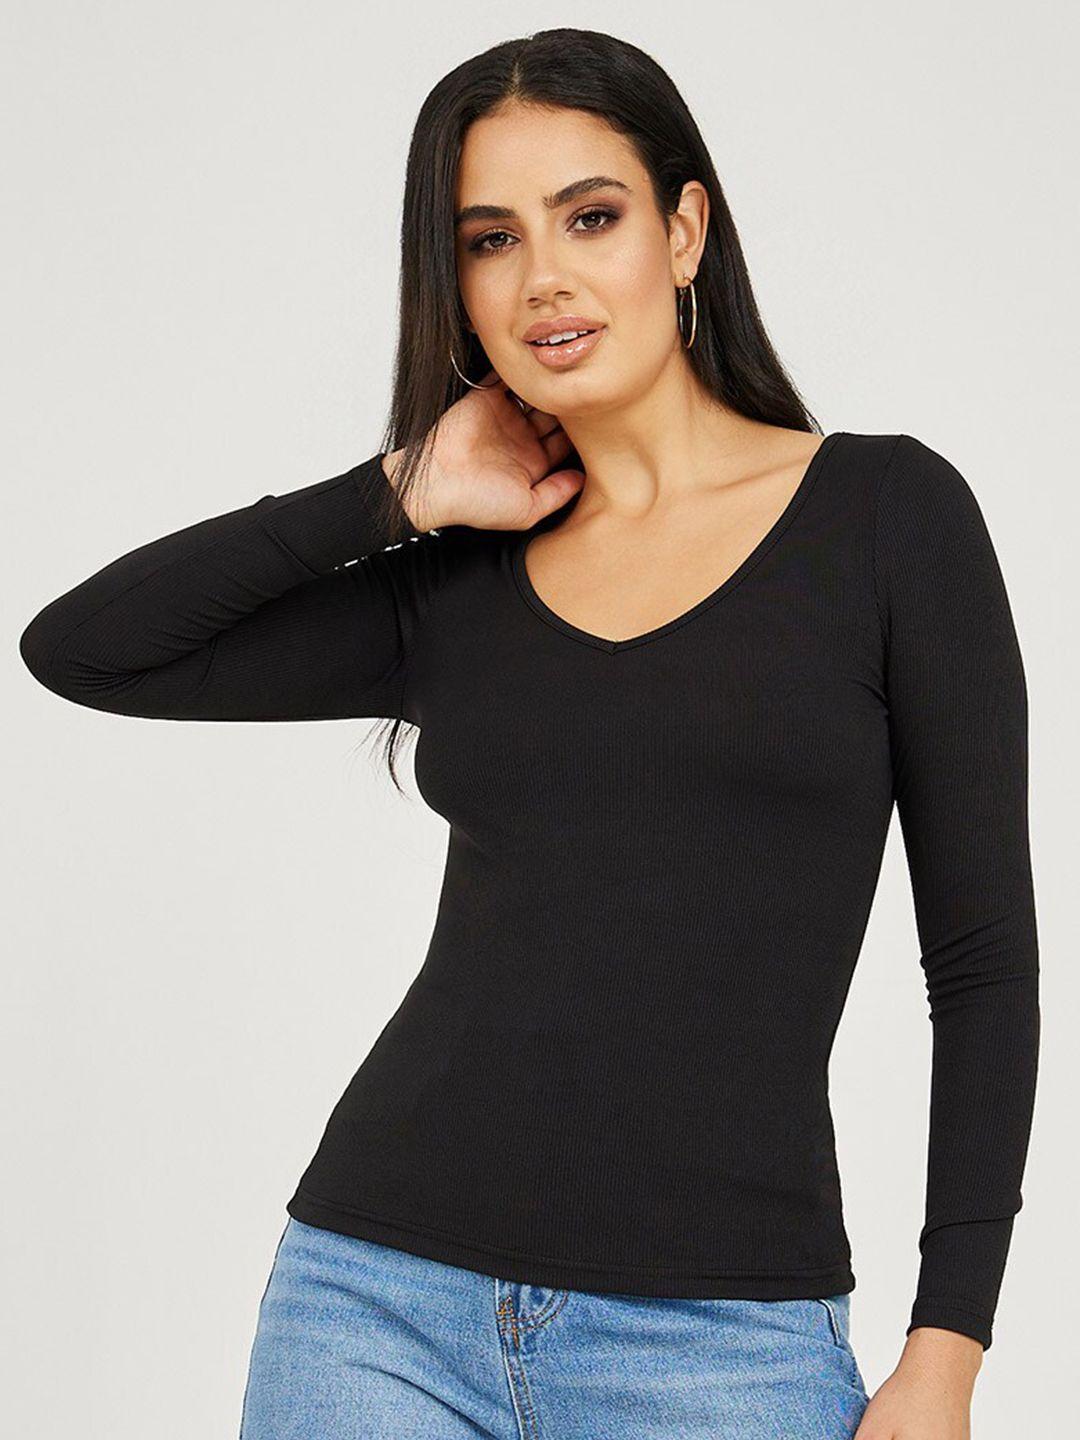 styli-black-solid-top